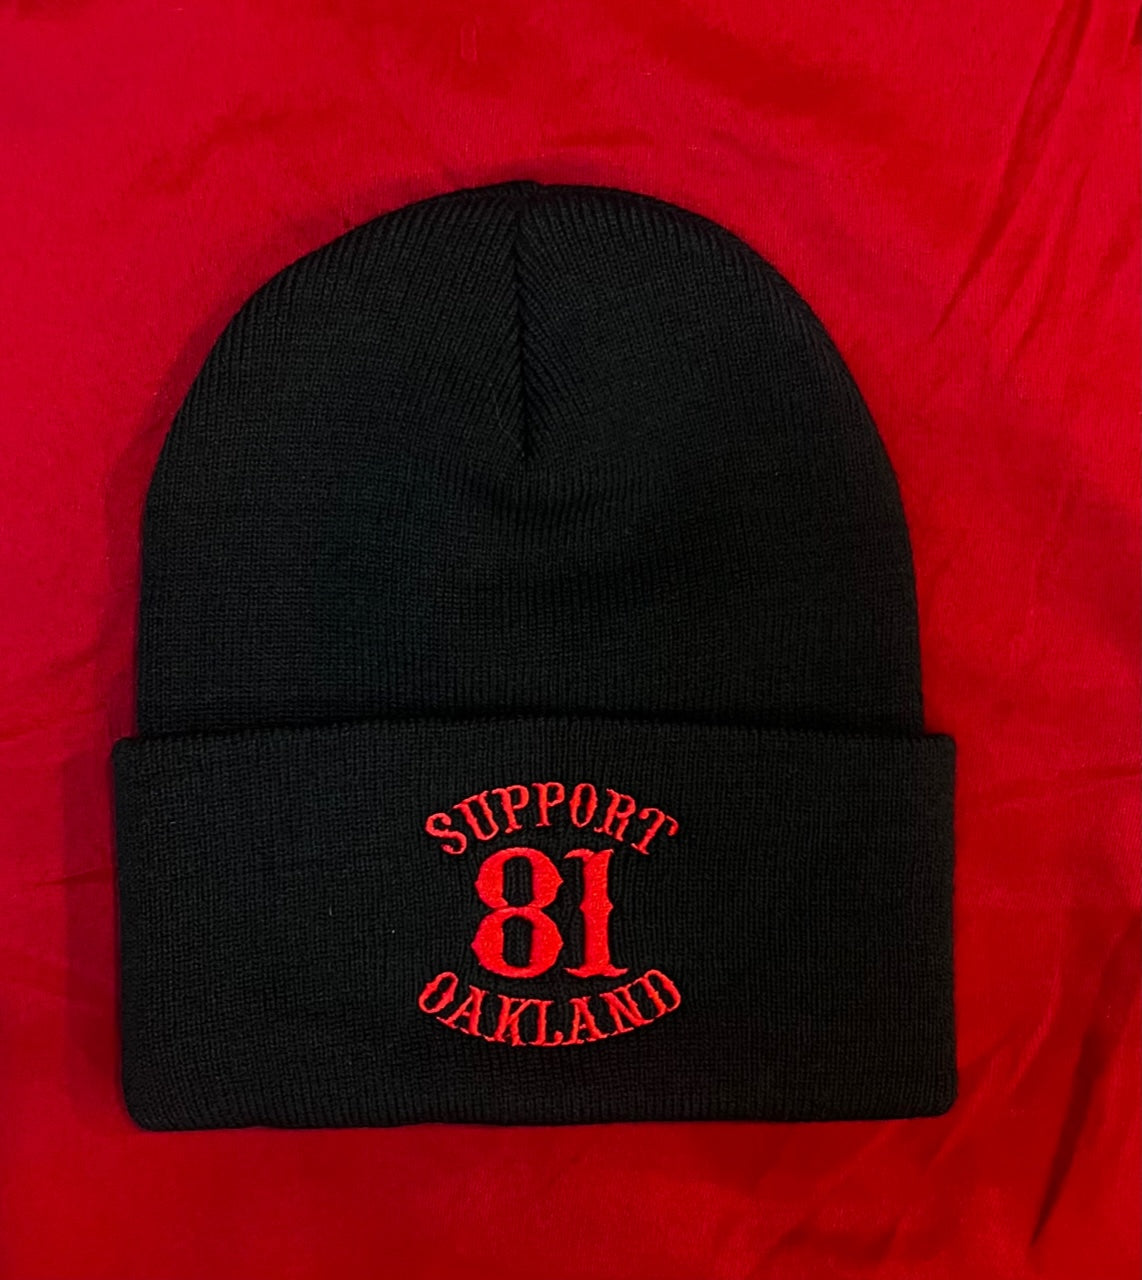 2 COLORS AVAILABLE - OAKLAND SUPPORT 81 BEANIE